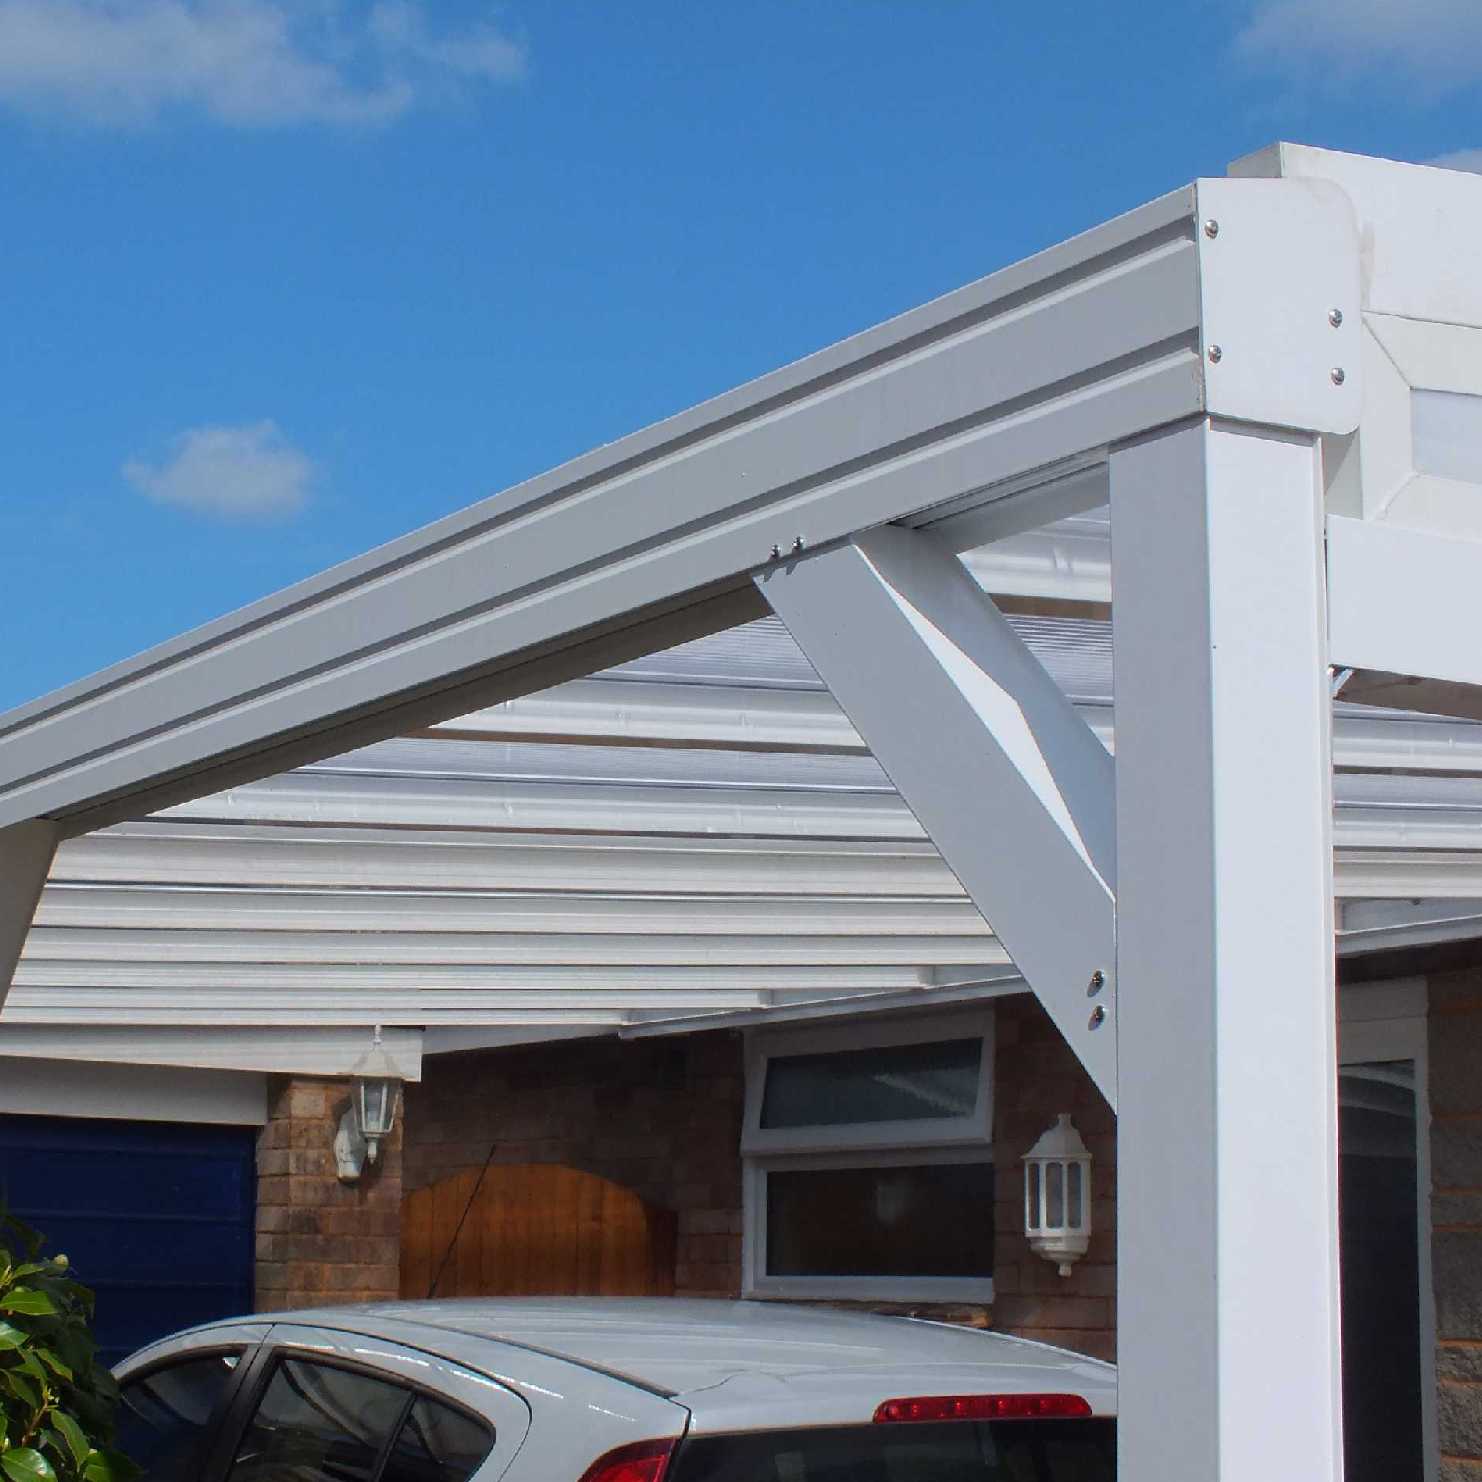 Buy Omega Smart Lean-To Canopy, White with 16mm Polycarbonate Glazing - 6.0m (W) x 2.0m (P), (3) Supporting Posts online today